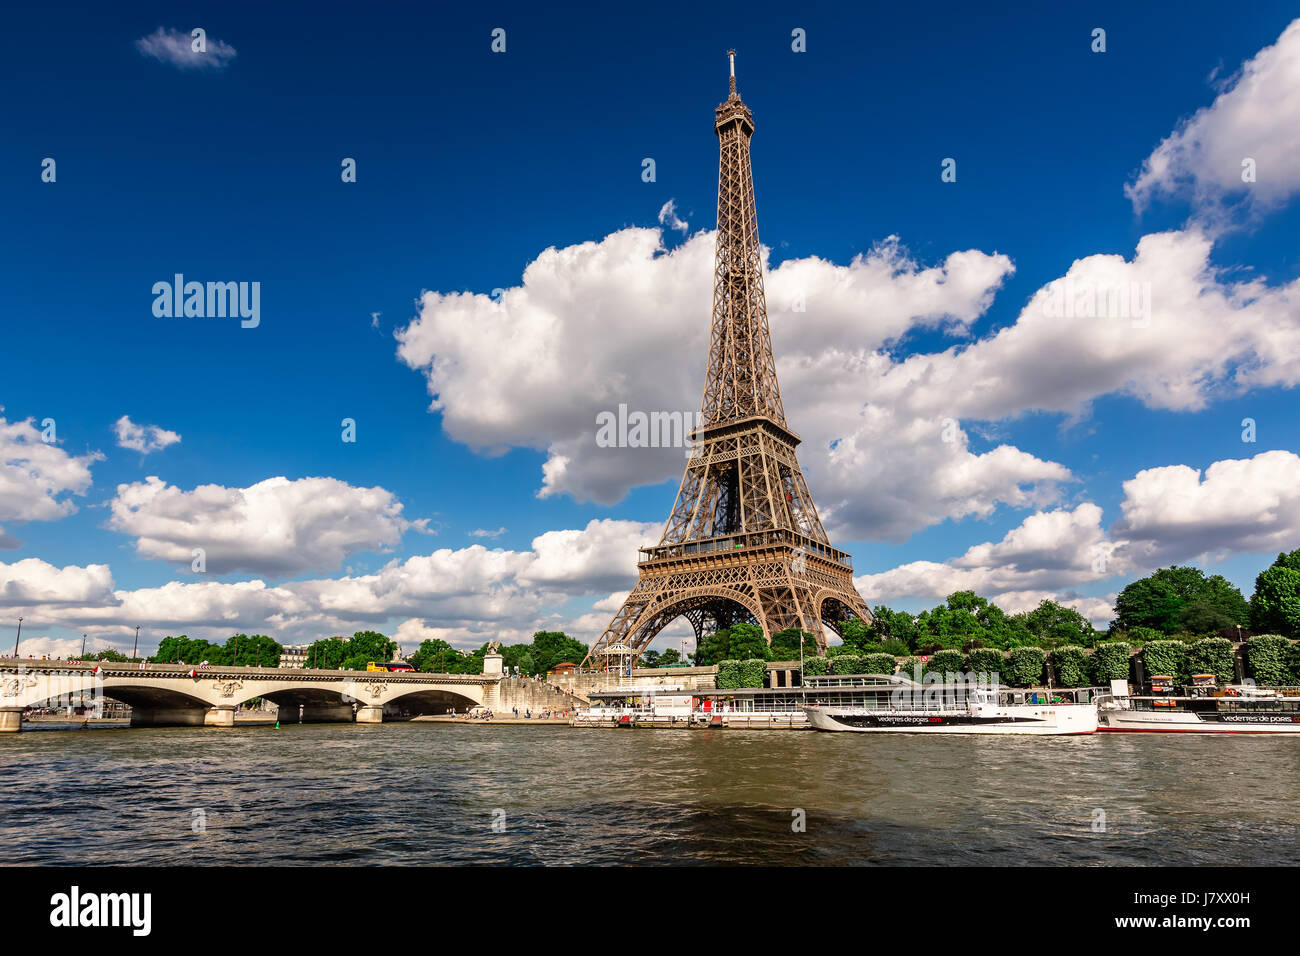 Eiffel Tower and Seine River in Paris, France Stock Photo